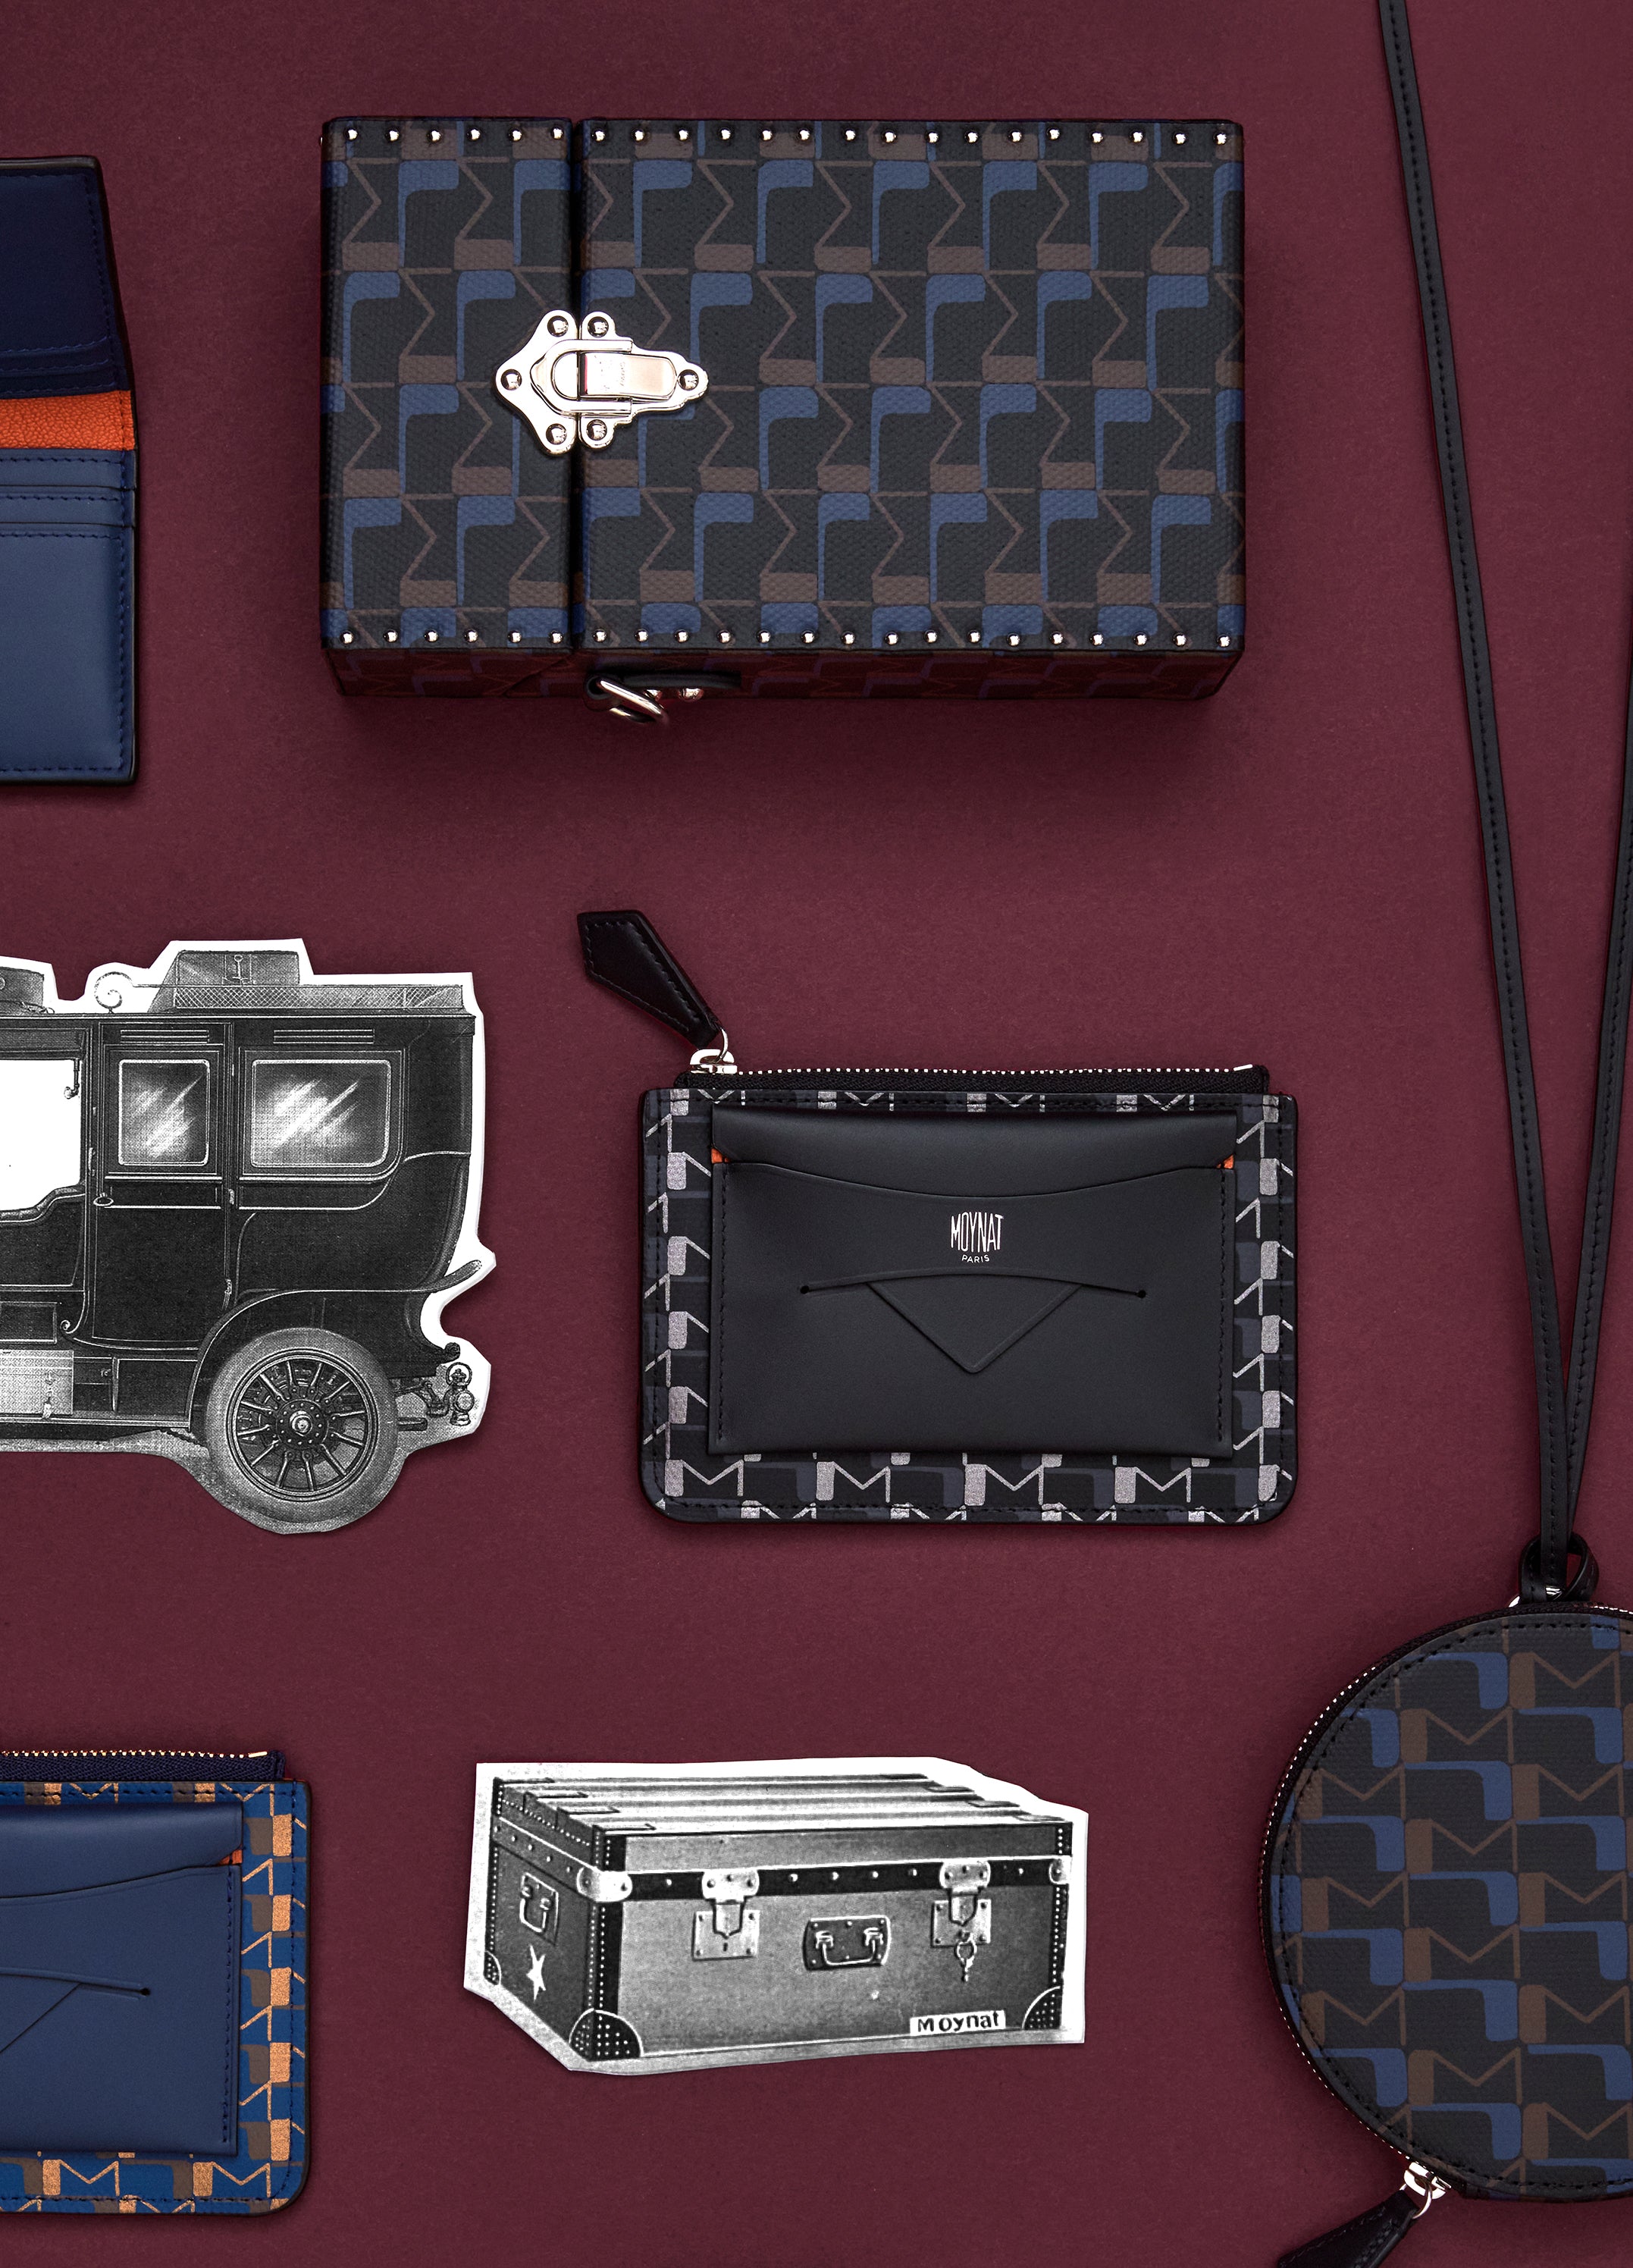 MOYNAT - The Wheel bag in Toile 1920. A modern signature